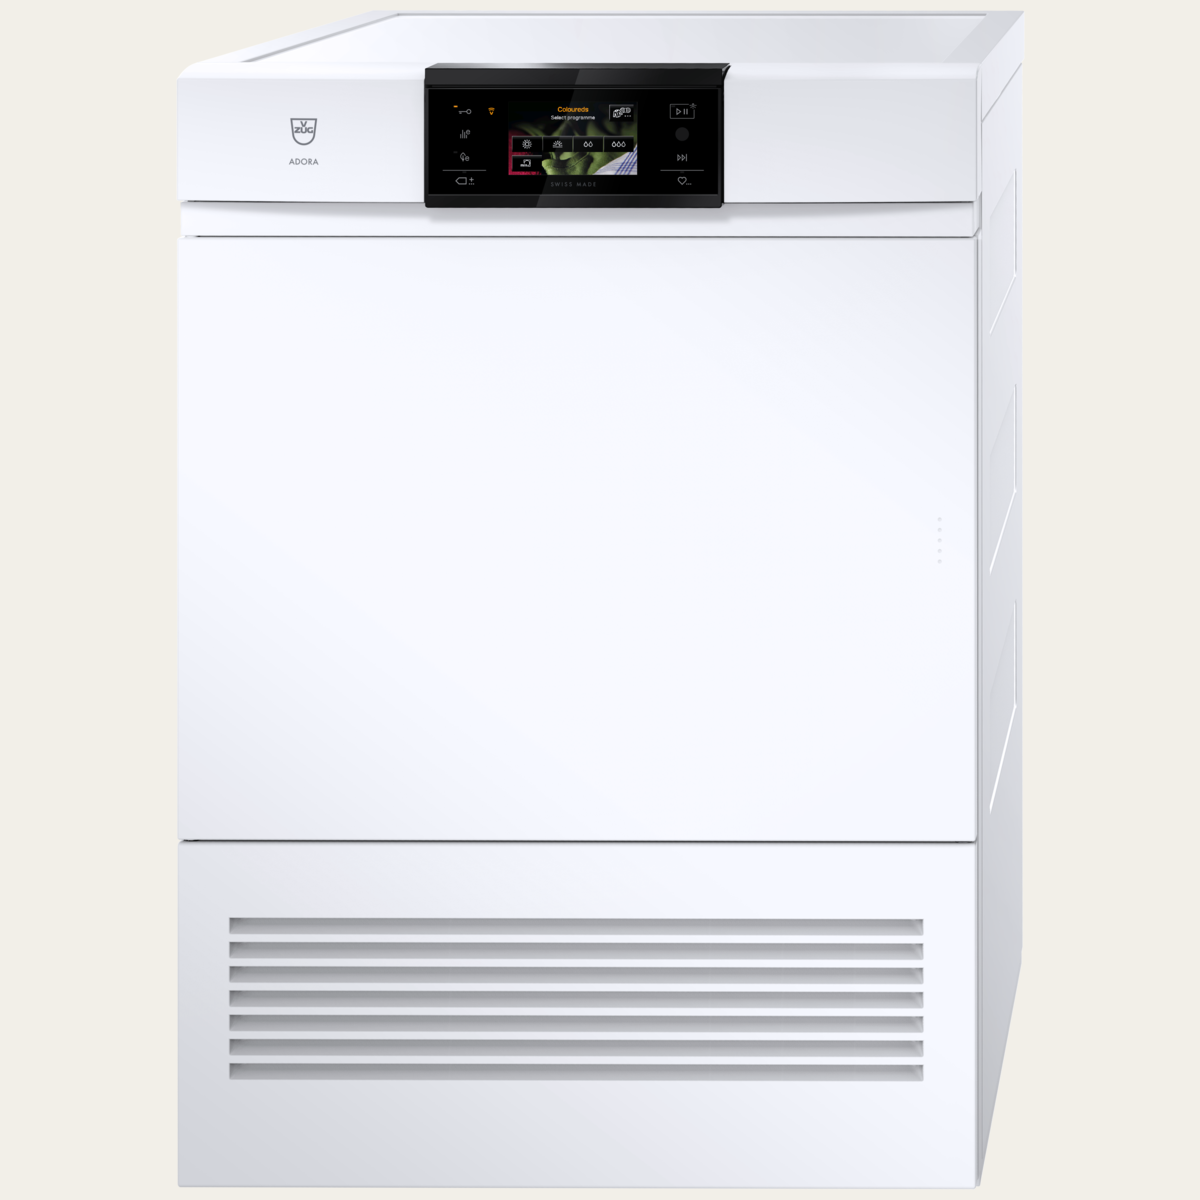 V-ZUG Tumble dryer AdoraDry V6000, Door hinge: Left,V-ZUG-Home, Nominal capacity: 7 kg, Full-colour graphic display, Air transport according to UN 3358 prohibited